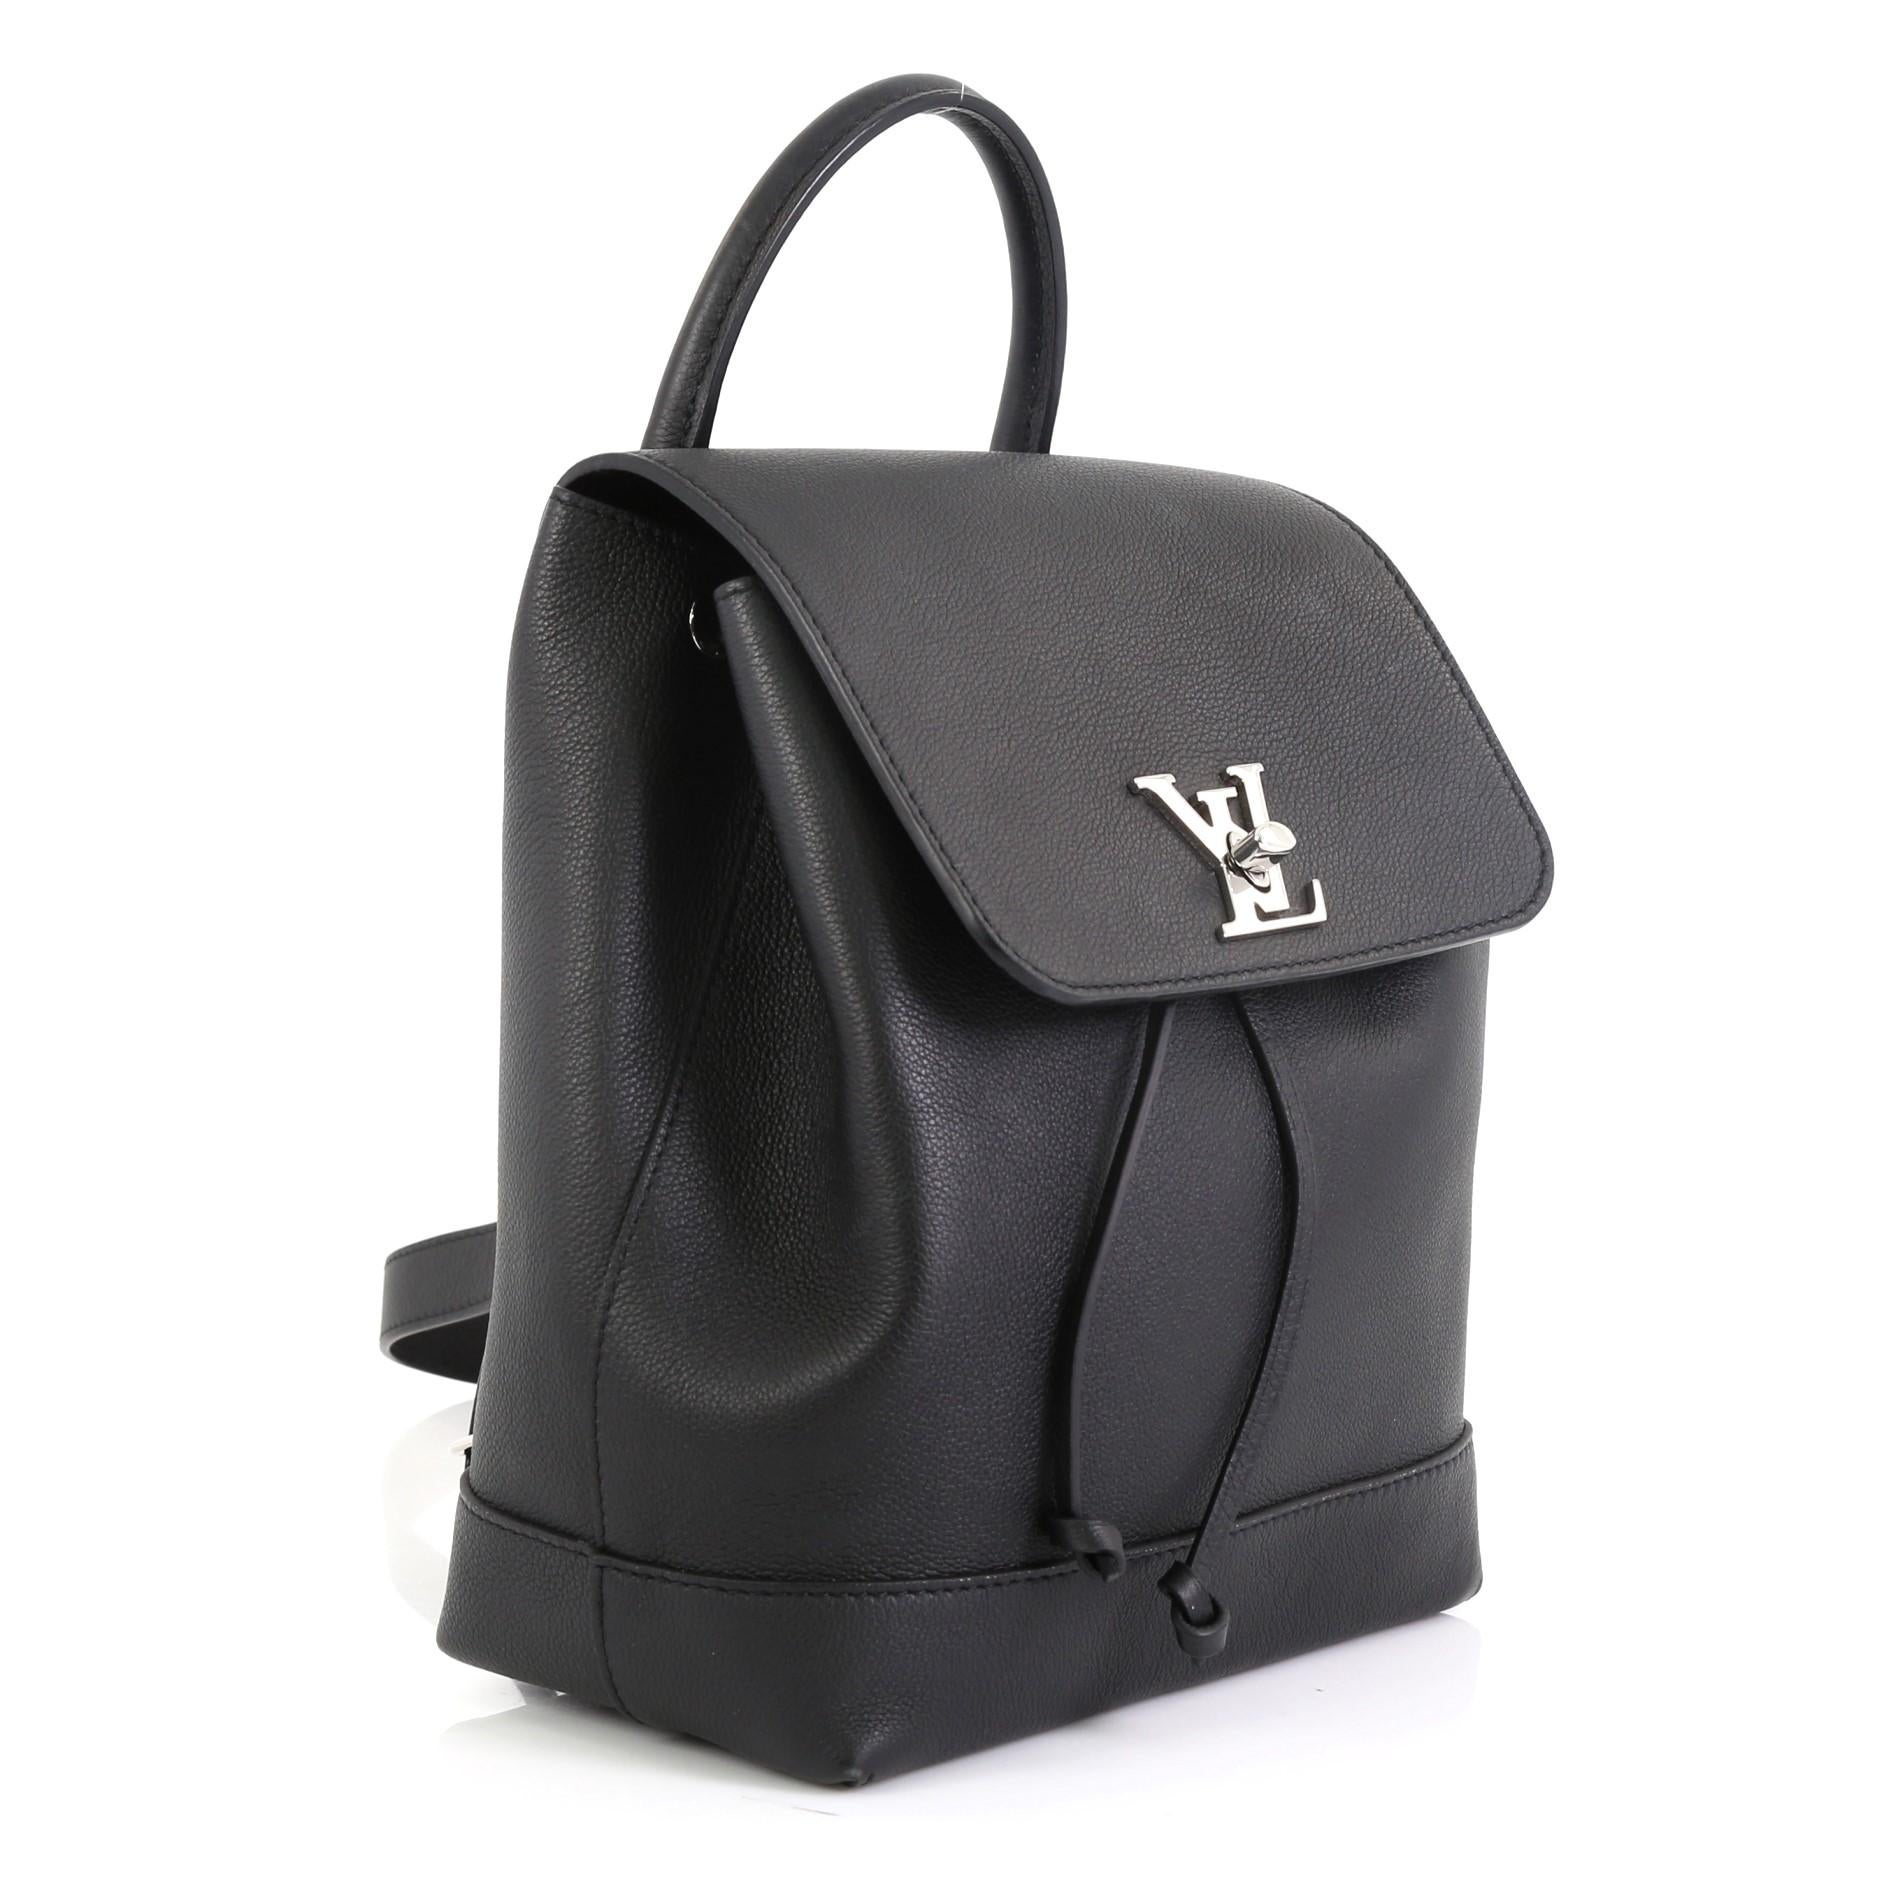 This Louis Vuitton Lockme Backpack Leather, crafted in black leather, features a leather top handle, adjustable shoulder straps, and silver-tone hardware. Its turn-lock and drawstring closure opens to a black microfiber interior with slip pocket.